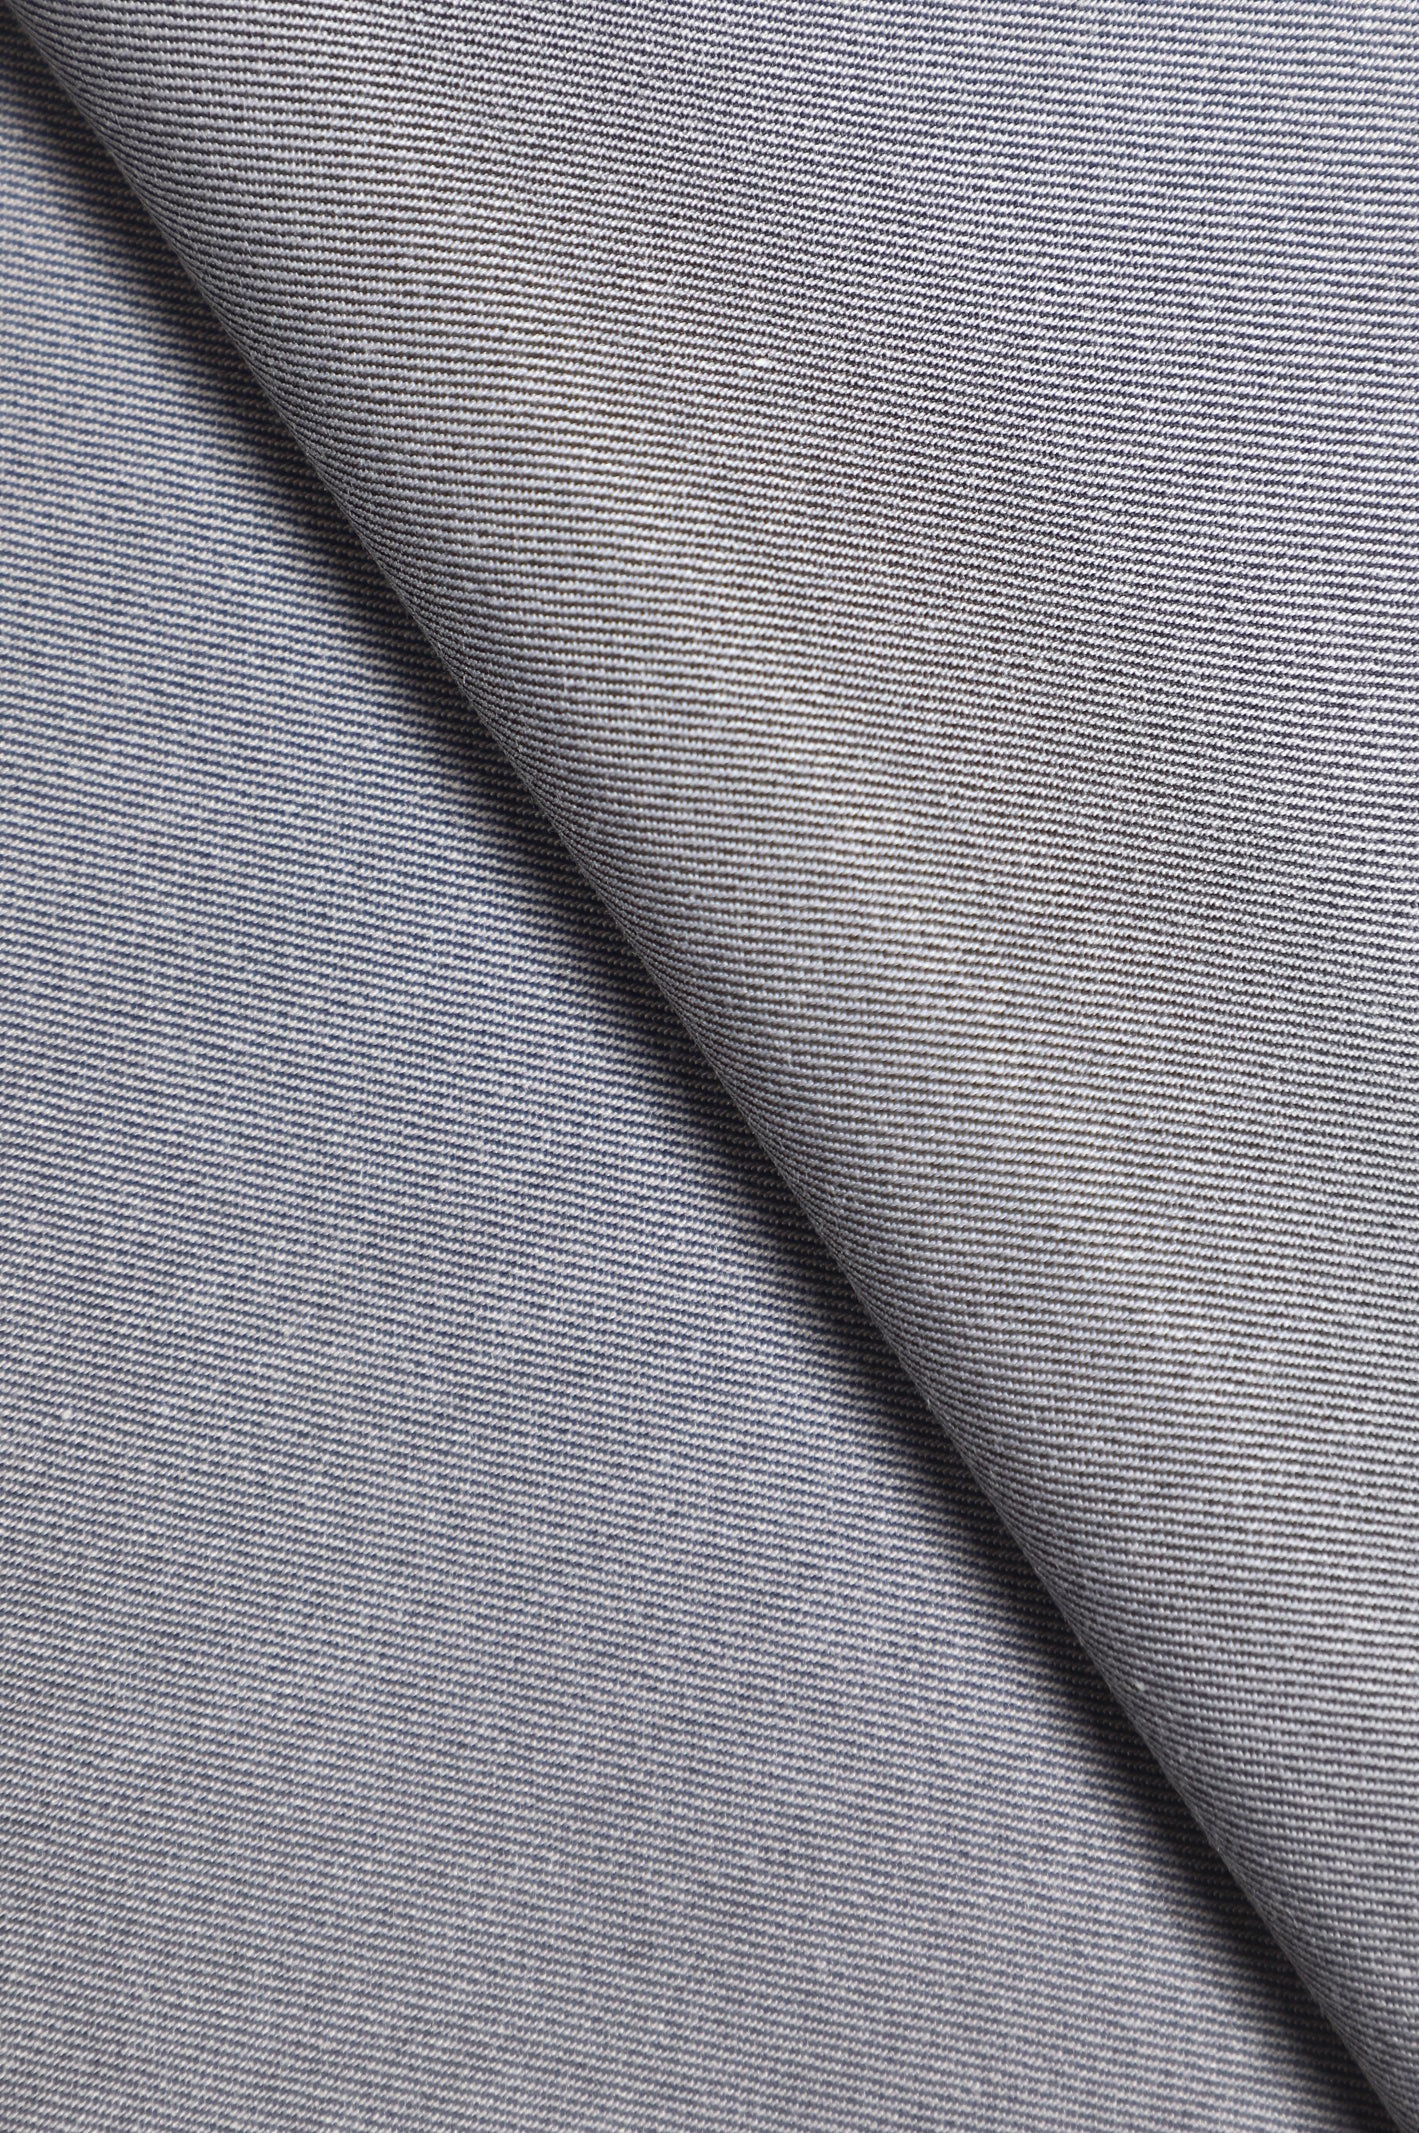 Unstitched Fabric for Men SKU: US0219-GREY - Diners